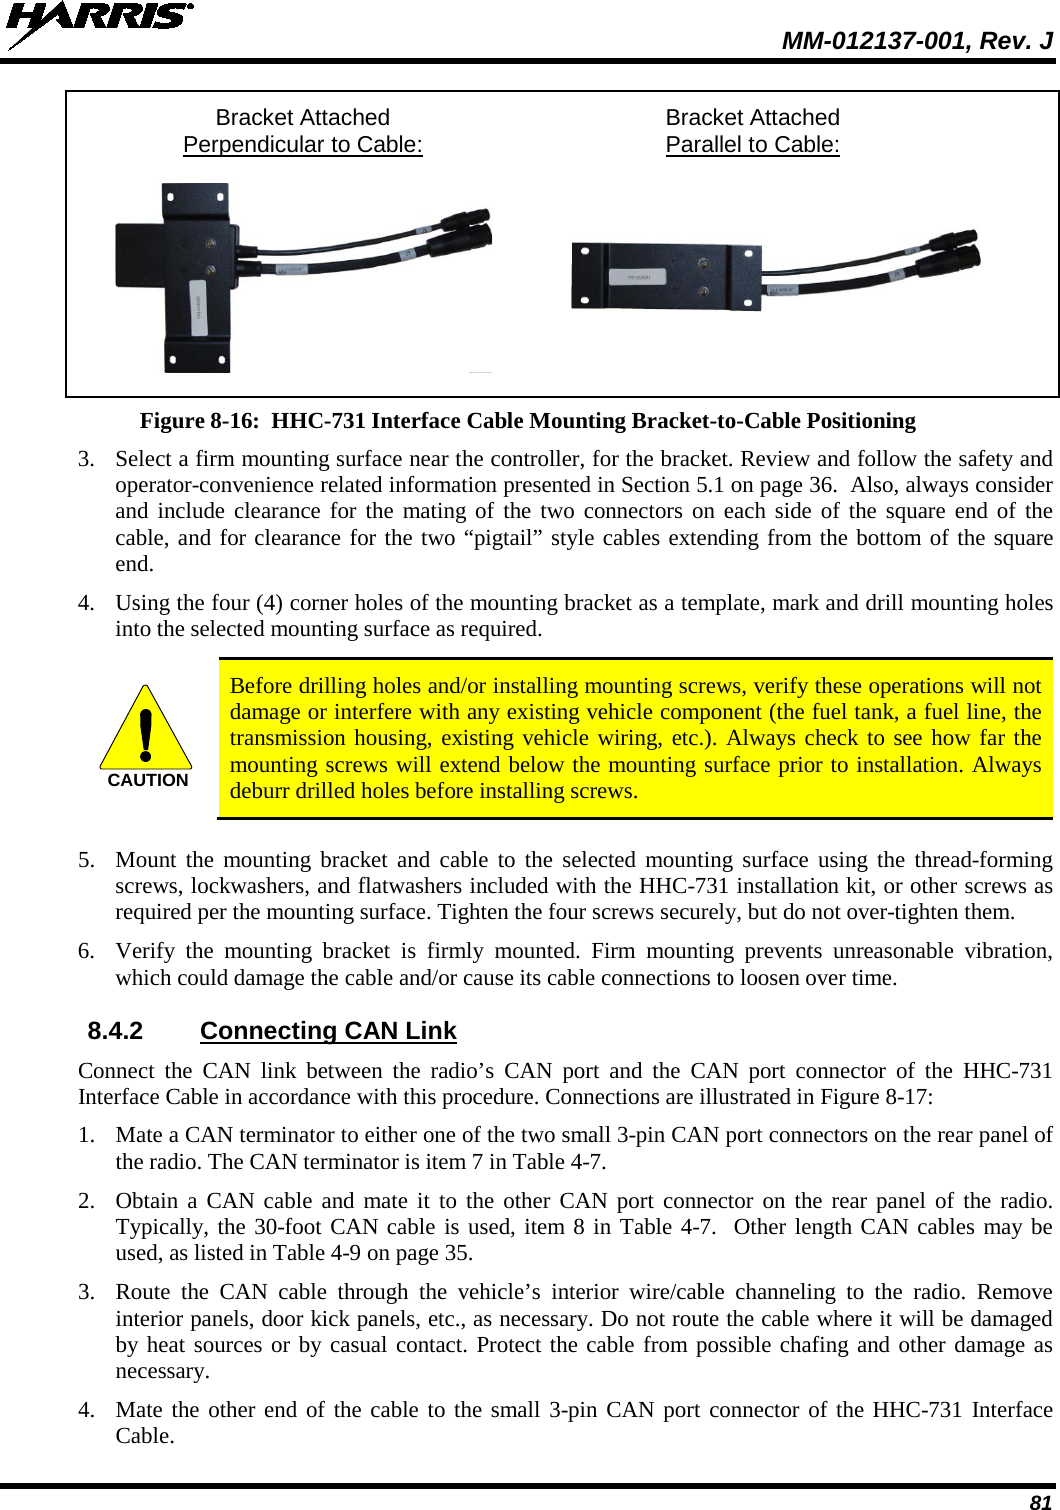  MM-012137-001, Rev. J 81  Bracket Attached Bracket Attached   Perpendicular to Cable:  Parallel to Cable:     Figure 8-16:  HHC-731 Interface Cable Mounting Bracket-to-Cable Positioning 3. Select a firm mounting surface near the controller, for the bracket. Review and follow the safety and operator-convenience related information presented in Section 5.1 on page 36.  Also, always consider and include clearance for the mating of the two connectors on each side of the square end of the cable, and for clearance for the two “pigtail” style cables extending from the bottom of the square end. 4. Using the four (4) corner holes of the mounting bracket as a template, mark and drill mounting holes into the selected mounting surface as required.   Before drilling holes and/or installing mounting screws, verify these operations will not damage or interfere with any existing vehicle component (the fuel tank, a fuel line, the transmission housing, existing vehicle wiring, etc.). Always check to see how far the mounting screws will extend below the mounting surface prior to installation. Always deburr drilled holes before installing screws.  5. Mount the mounting bracket and cable to the selected mounting surface using the thread-forming screws, lockwashers, and flatwashers included with the HHC-731 installation kit, or other screws as required per the mounting surface. Tighten the four screws securely, but do not over-tighten them. 6. Verify the mounting  bracket is firmly mounted. Firm mounting prevents unreasonable vibration, which could damage the cable and/or cause its cable connections to loosen over time. 8.4.2 Connecting CAN Link Connect  the CAN link between the radio’s CAN port and the CAN  port  connector of the HHC-731 Interface Cable in accordance with this procedure. Connections are illustrated in Figure 8-17: 1. Mate a CAN terminator to either one of the two small 3-pin CAN port connectors on the rear panel of the radio. The CAN terminator is item 7 in Table 4-7. 2. Obtain a CAN cable and mate it to the other CAN port connector on the rear panel of the radio. Typically, the 30-foot CAN cable is used, item 8 in Table 4-7.  Other length CAN cables may be used, as listed in Table 4-9 on page 35. 3. Route the CAN  cable through the vehicle’s interior wire/cable channeling to the radio. Remove interior panels, door kick panels, etc., as necessary. Do not route the cable where it will be damaged by heat sources or by casual contact. Protect the cable from possible chafing and other damage as necessary. 4. Mate the other end of the cable to the small 3-pin CAN port connector of the HHC-731 Interface Cable. CAUTION